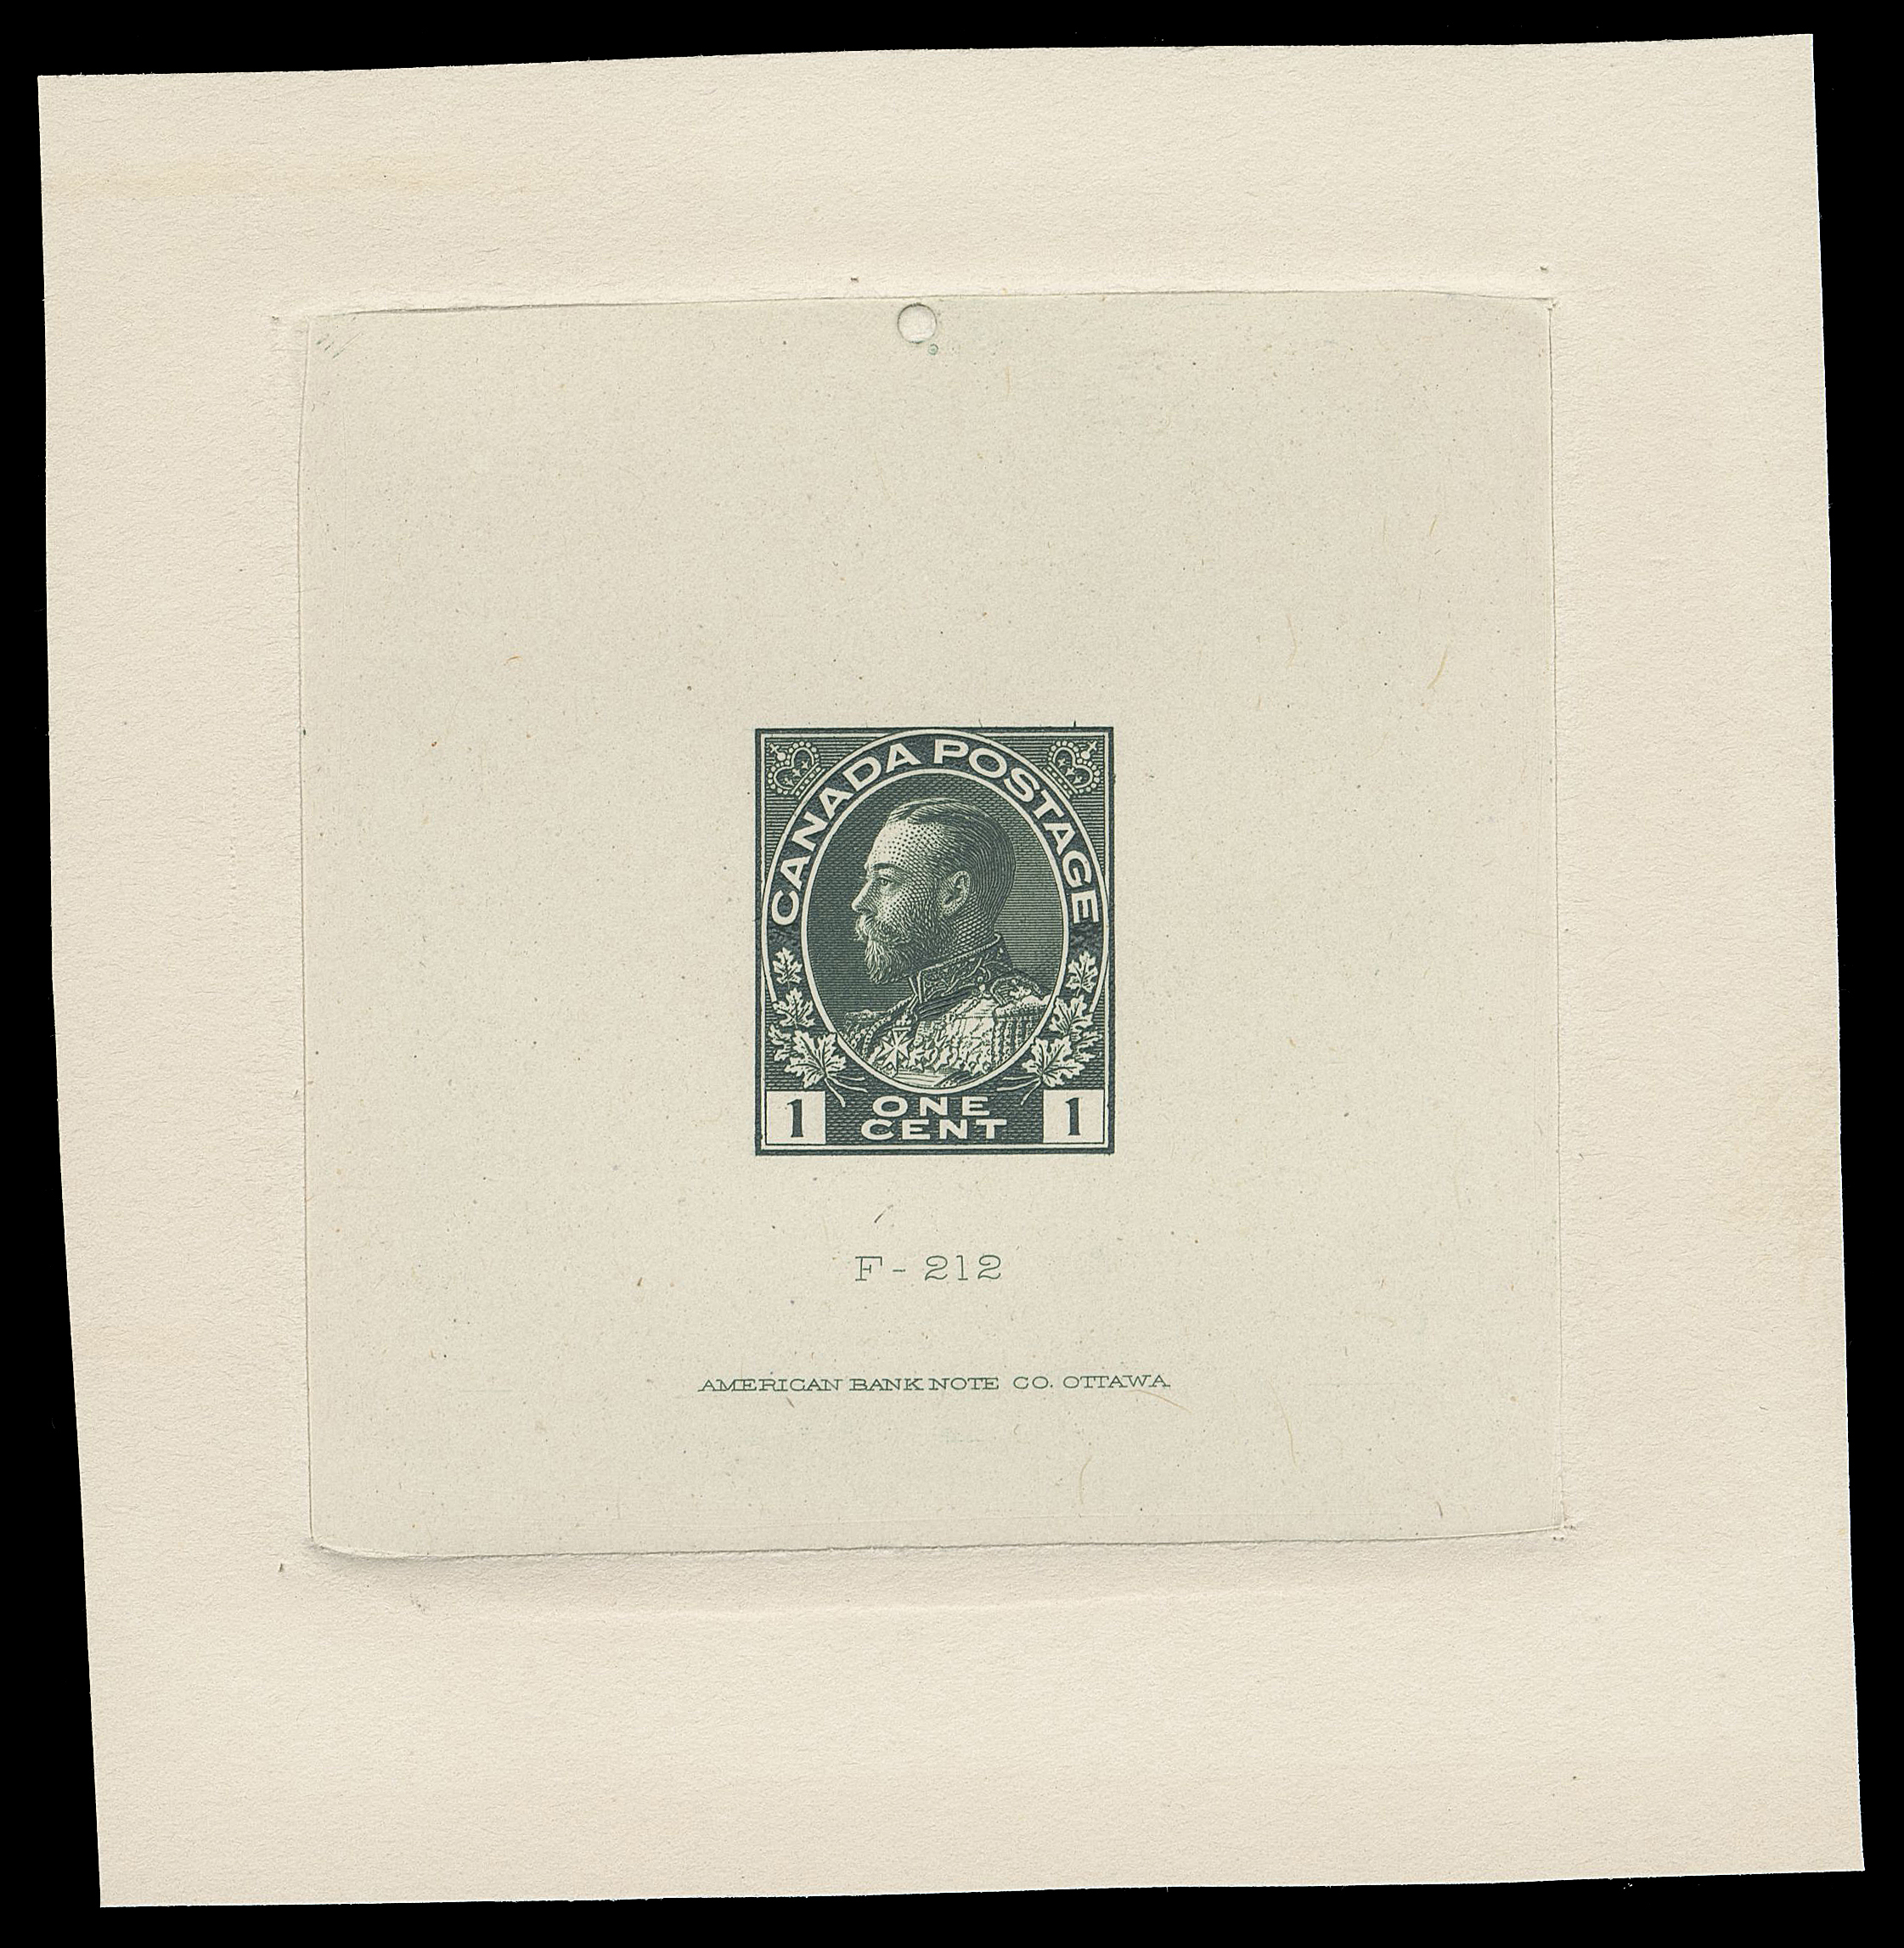 ADMIRAL PROOFS  104,A superb Die Proof printed in the first printing colour, showing characteristic strengthening of vertical frameline in upper right spandrel associated with the Retouched Die, on india paper 63 x 62mm, die sunk on slightly larger card 90 x 92mm; shows distinctive "circle" at edge of die sinkage at top (done prior to hardening of the die), die number "F-212" and ABNC imprint (23.5mm long). A remarkable die proof in immaculate condition, XF (Minuse & Pratt 104 A TC1b)